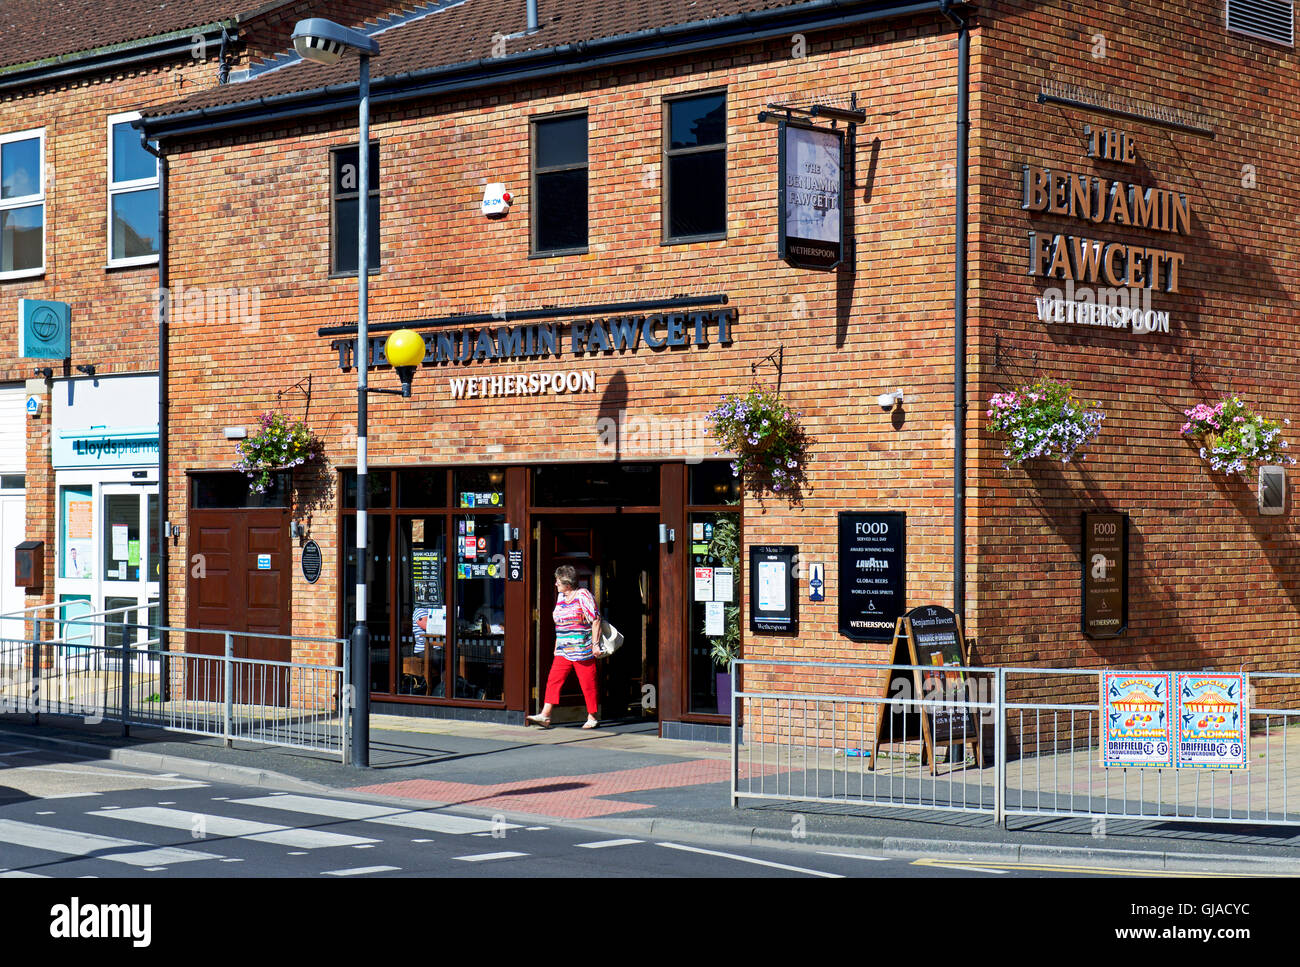 The Benjamin Fawcett, a Wetherspoon pub, Driffield, East Yorkshire, England UK Stock Photo